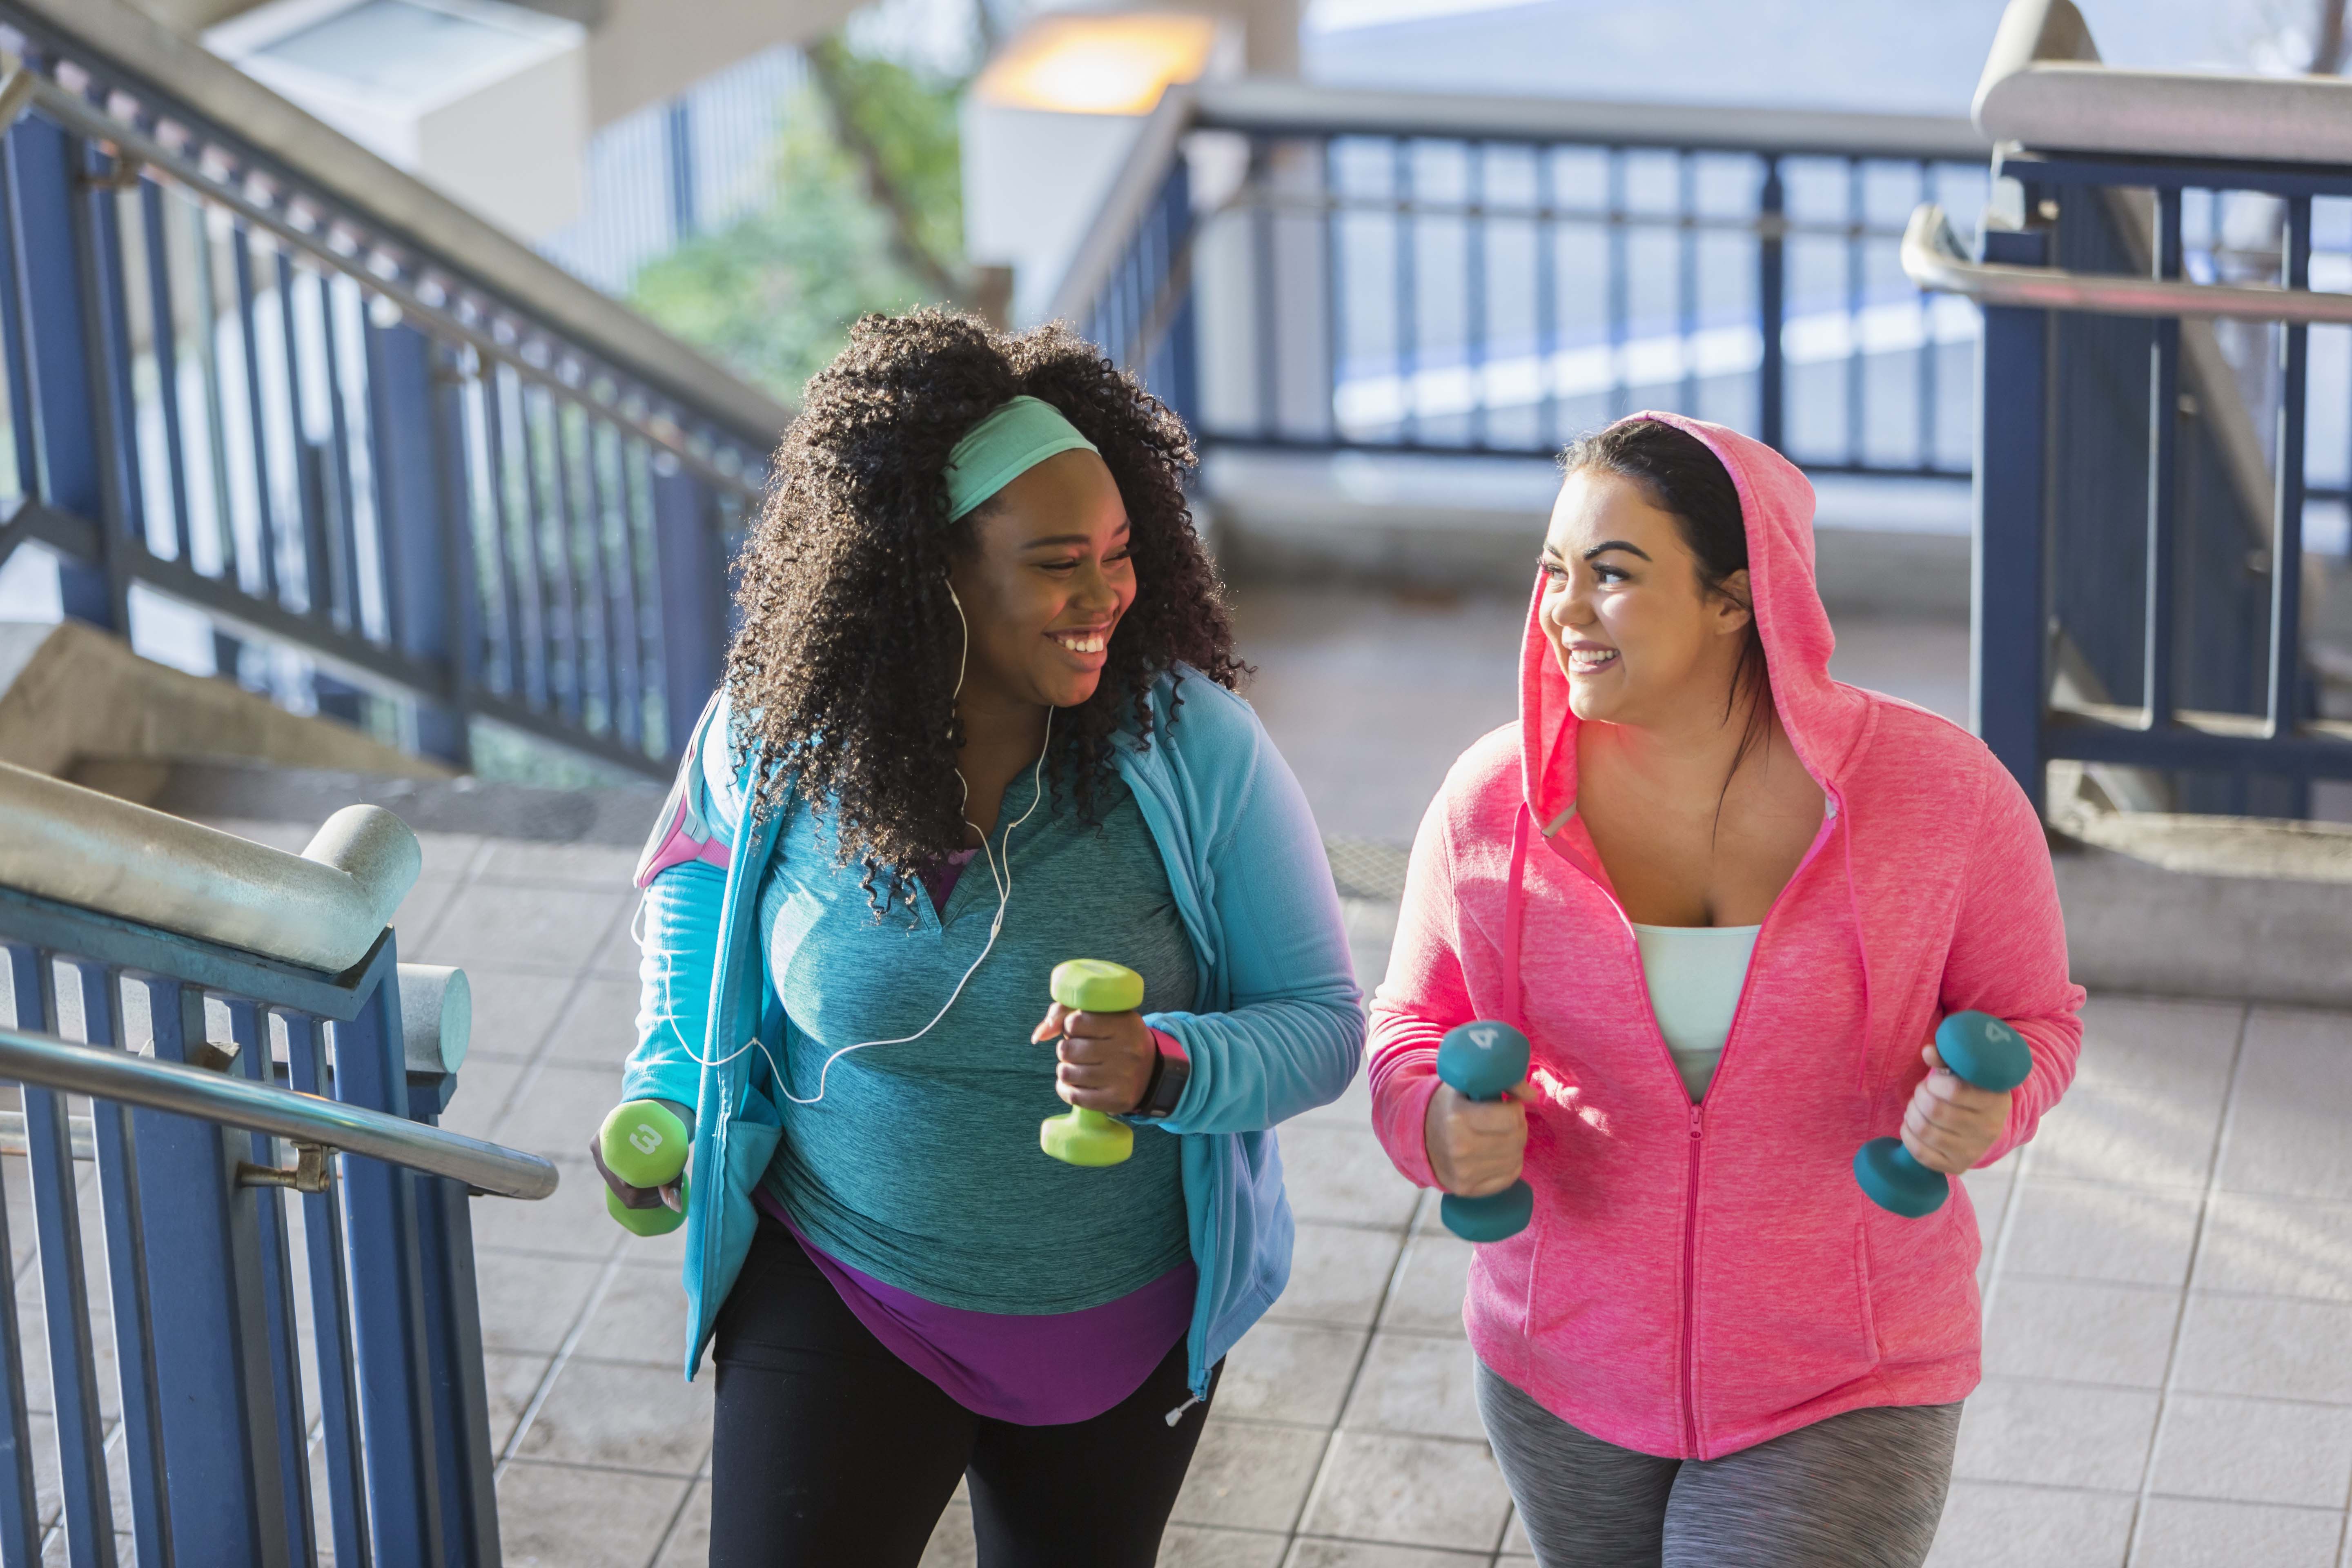 Two multi-ethnic young women exercising together. They are looking at each other, smiling, as they climb a staircase holding hand weights.